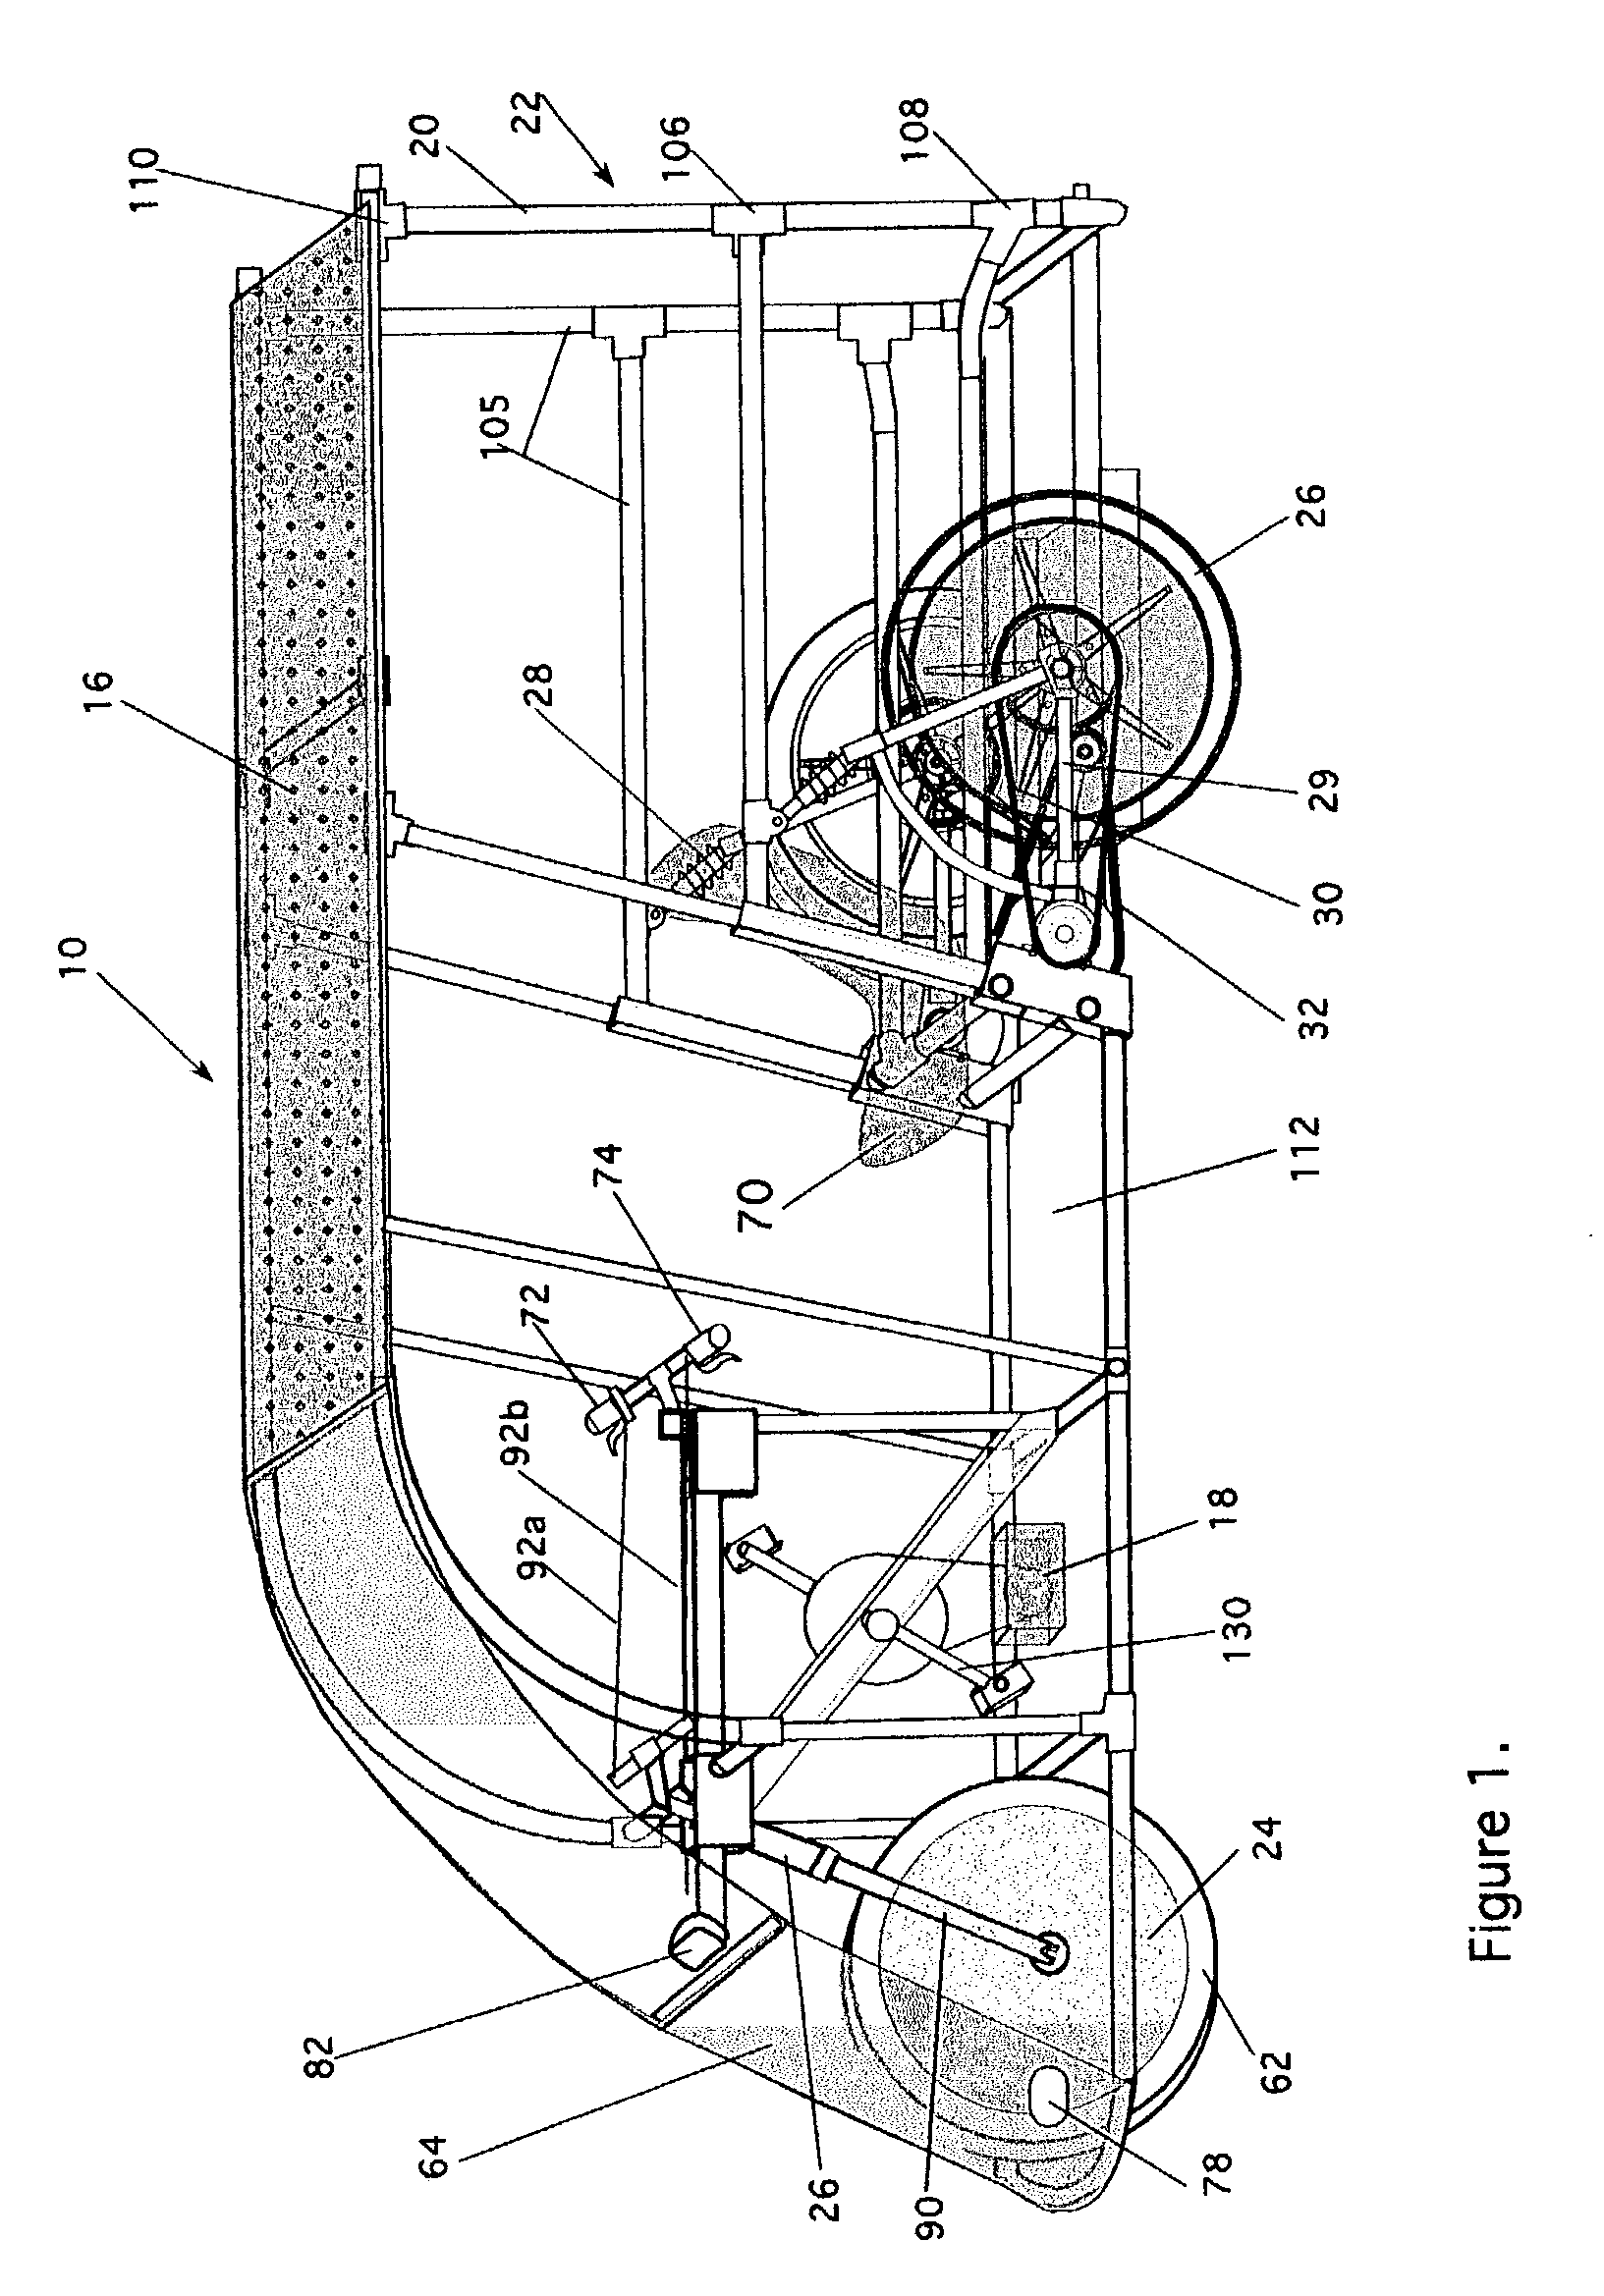 Combination pedal/motor driven tricycle